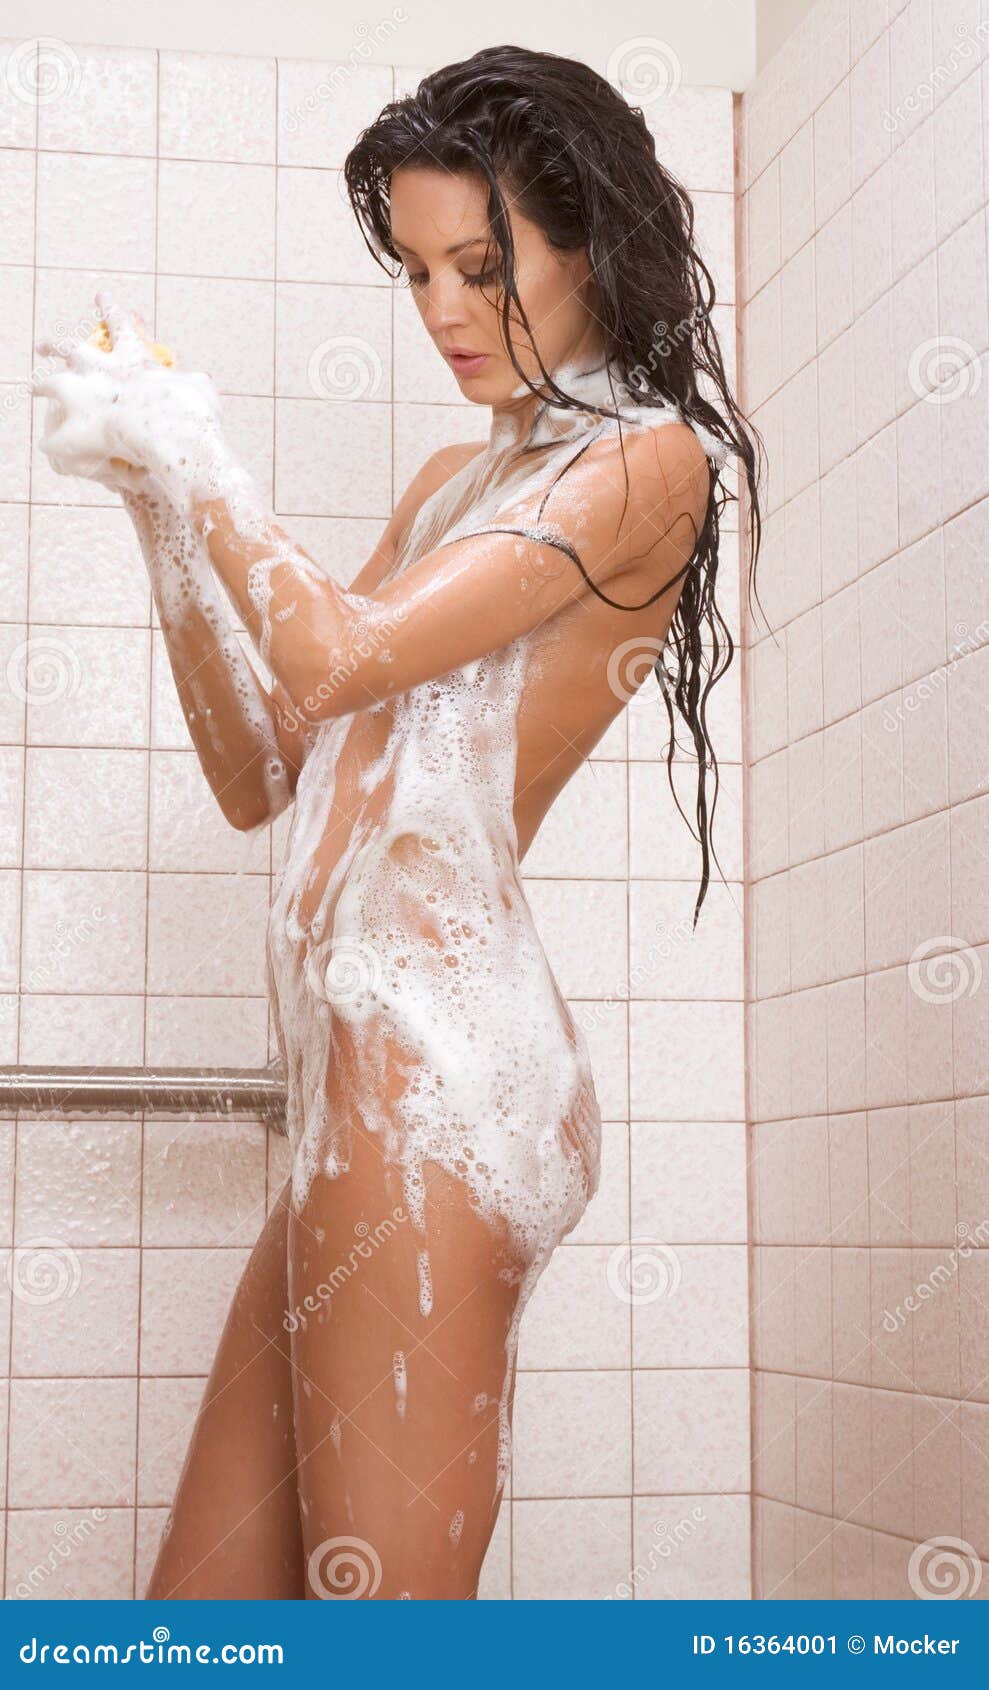 Naked Woman Taking A Shower rar rpezd